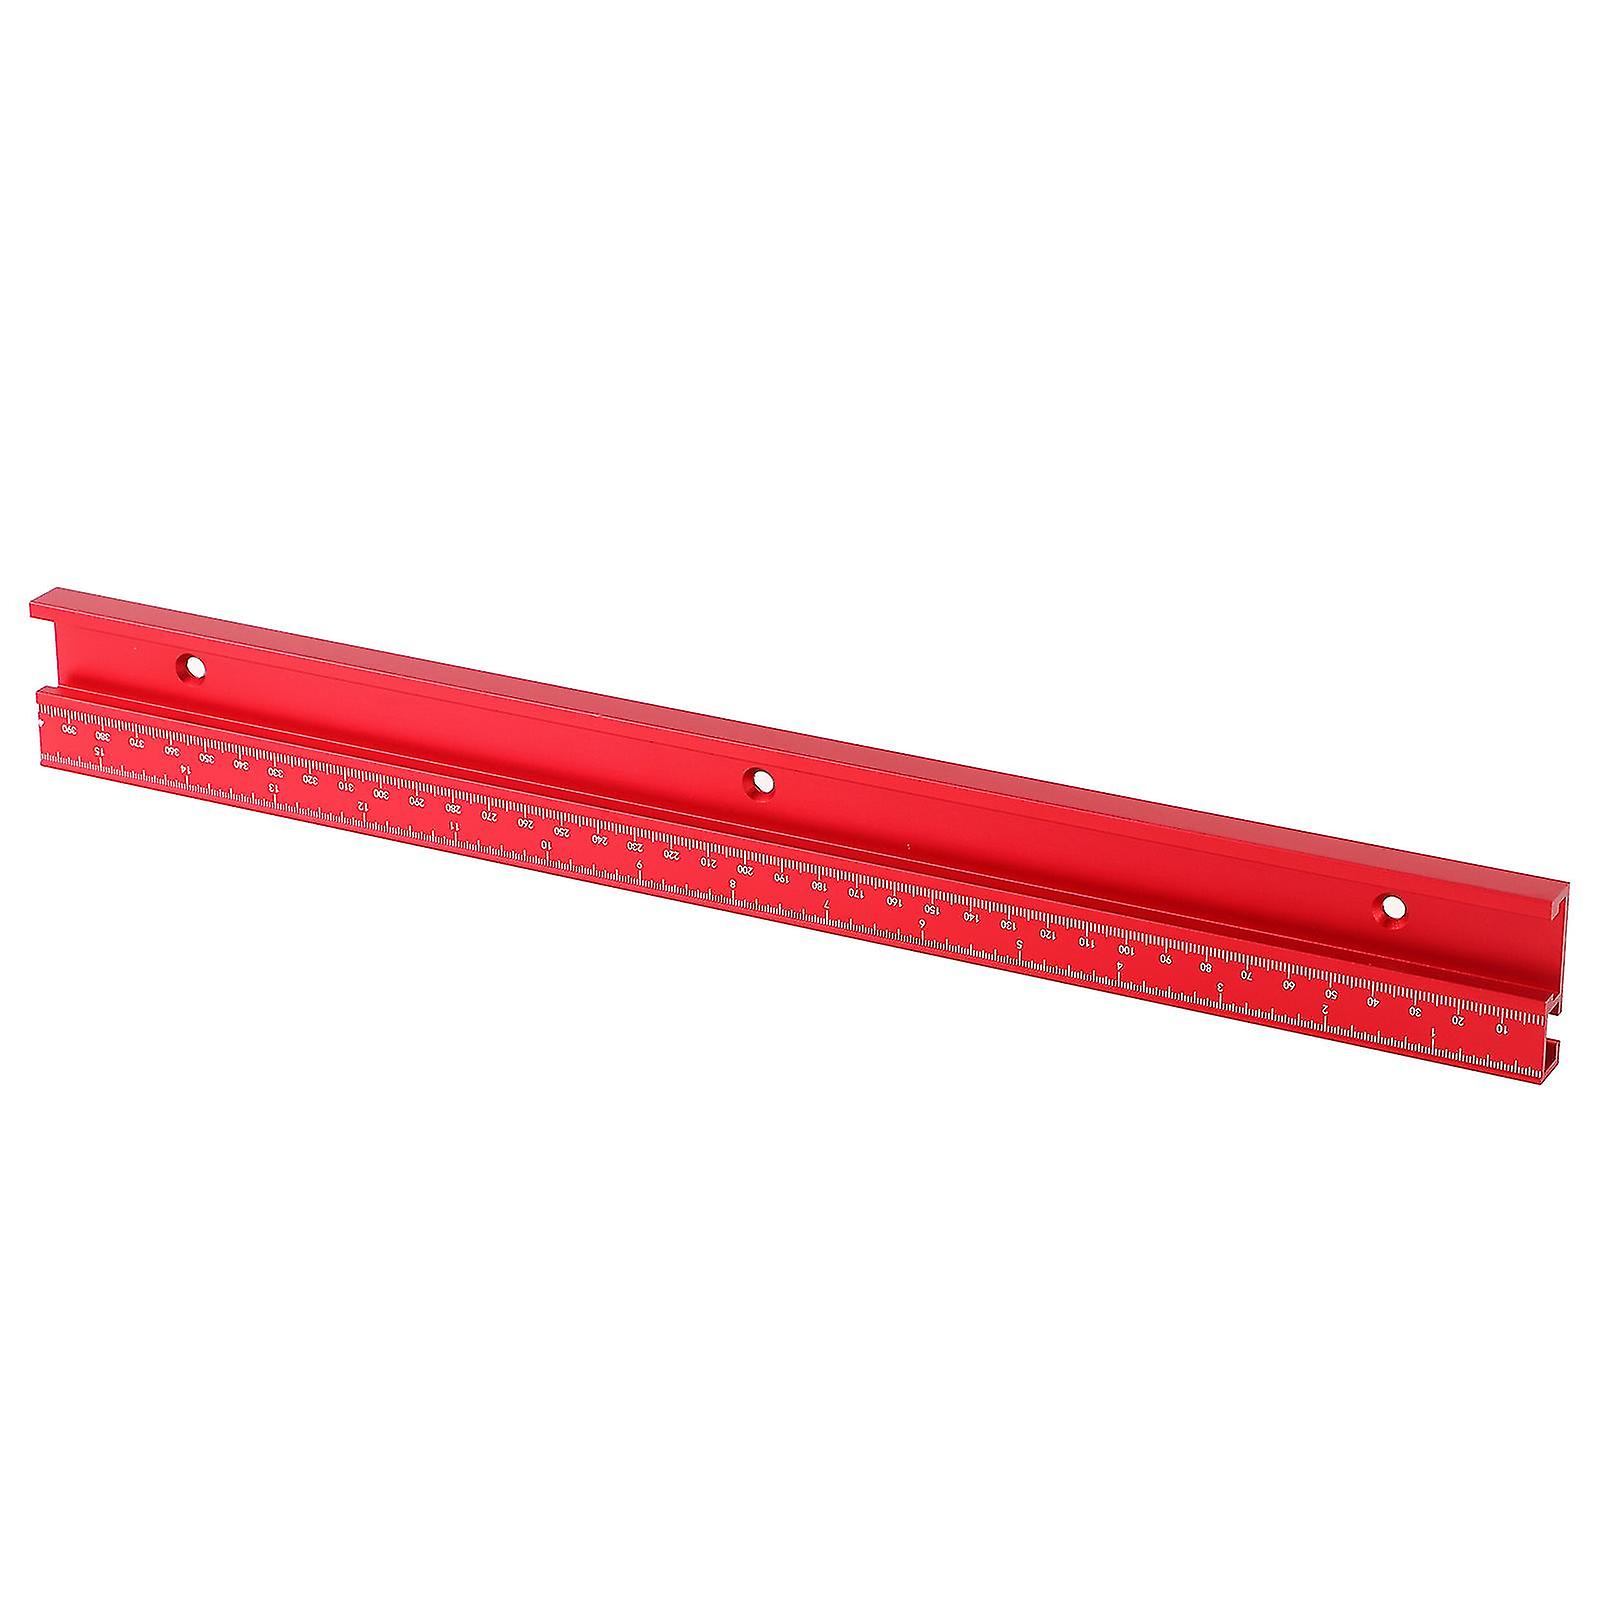 45 Type Woodworking Chute Aluminum Alloy Guide Rail Push Handle Table Saw Fixture Slot Parts400mm